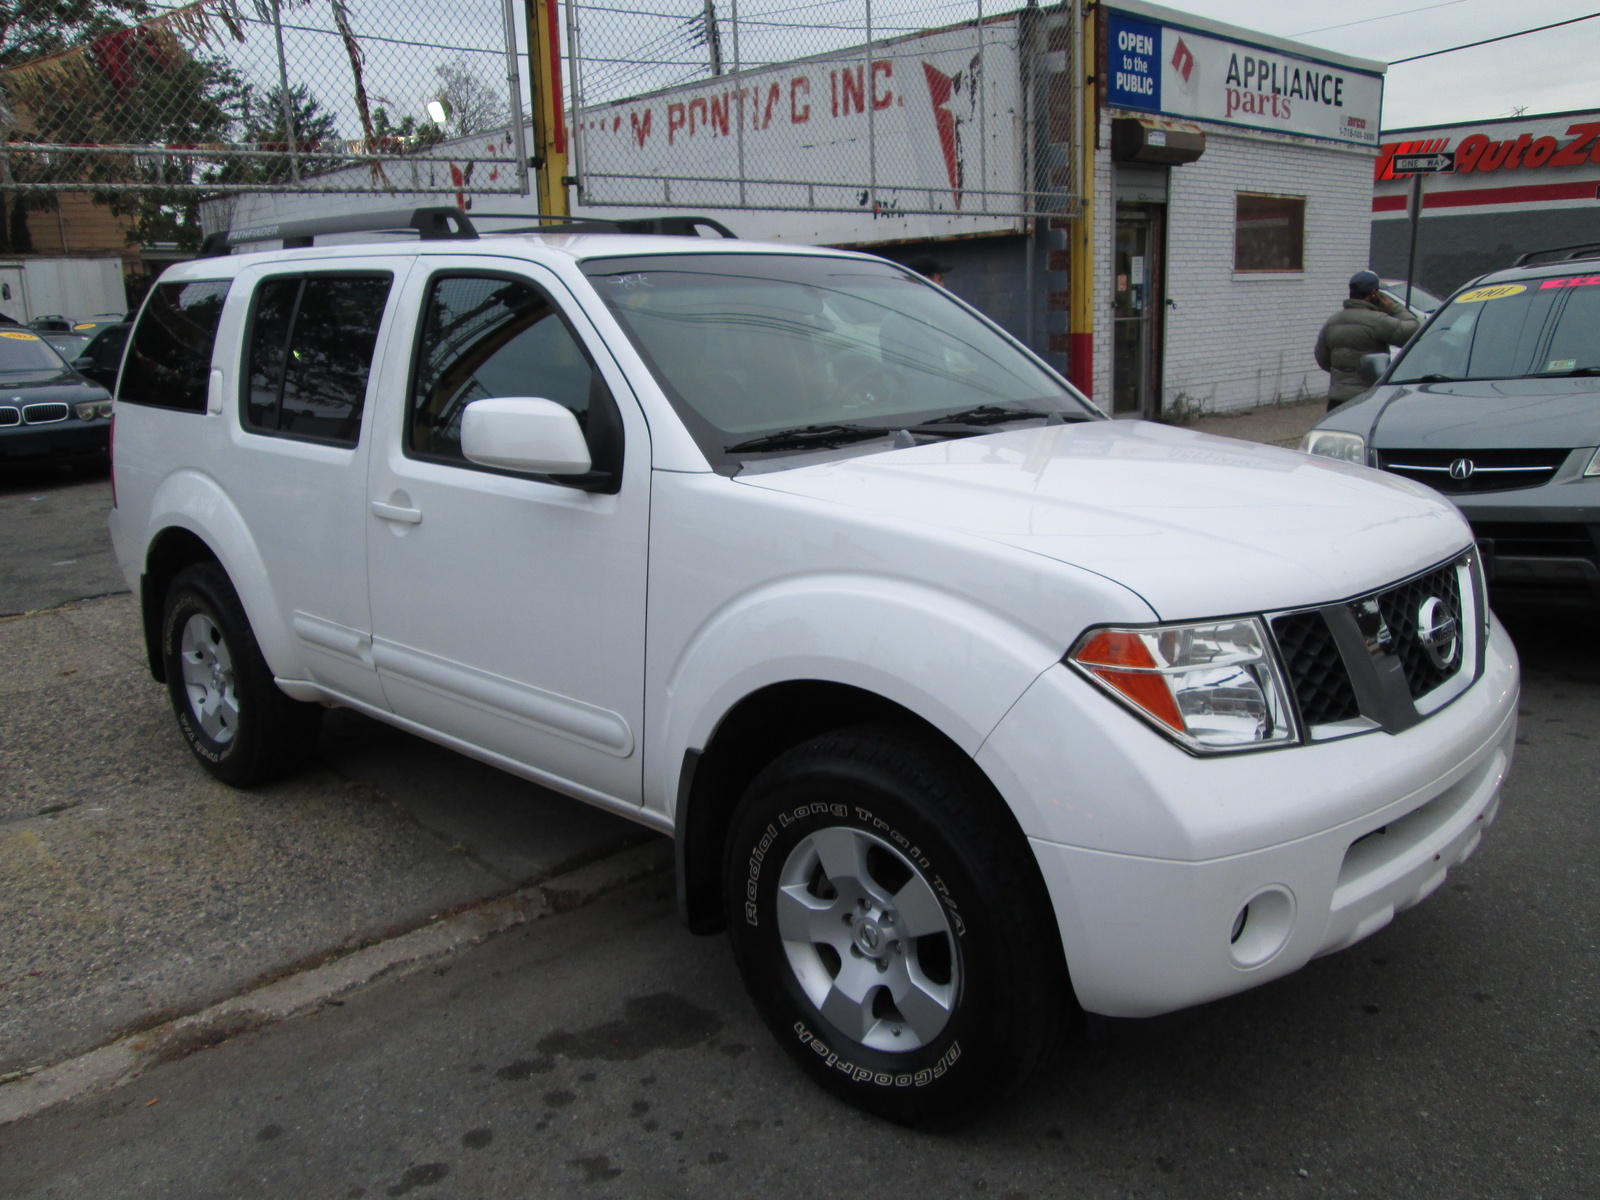 2007 Nissan pathfinder le specifications #2